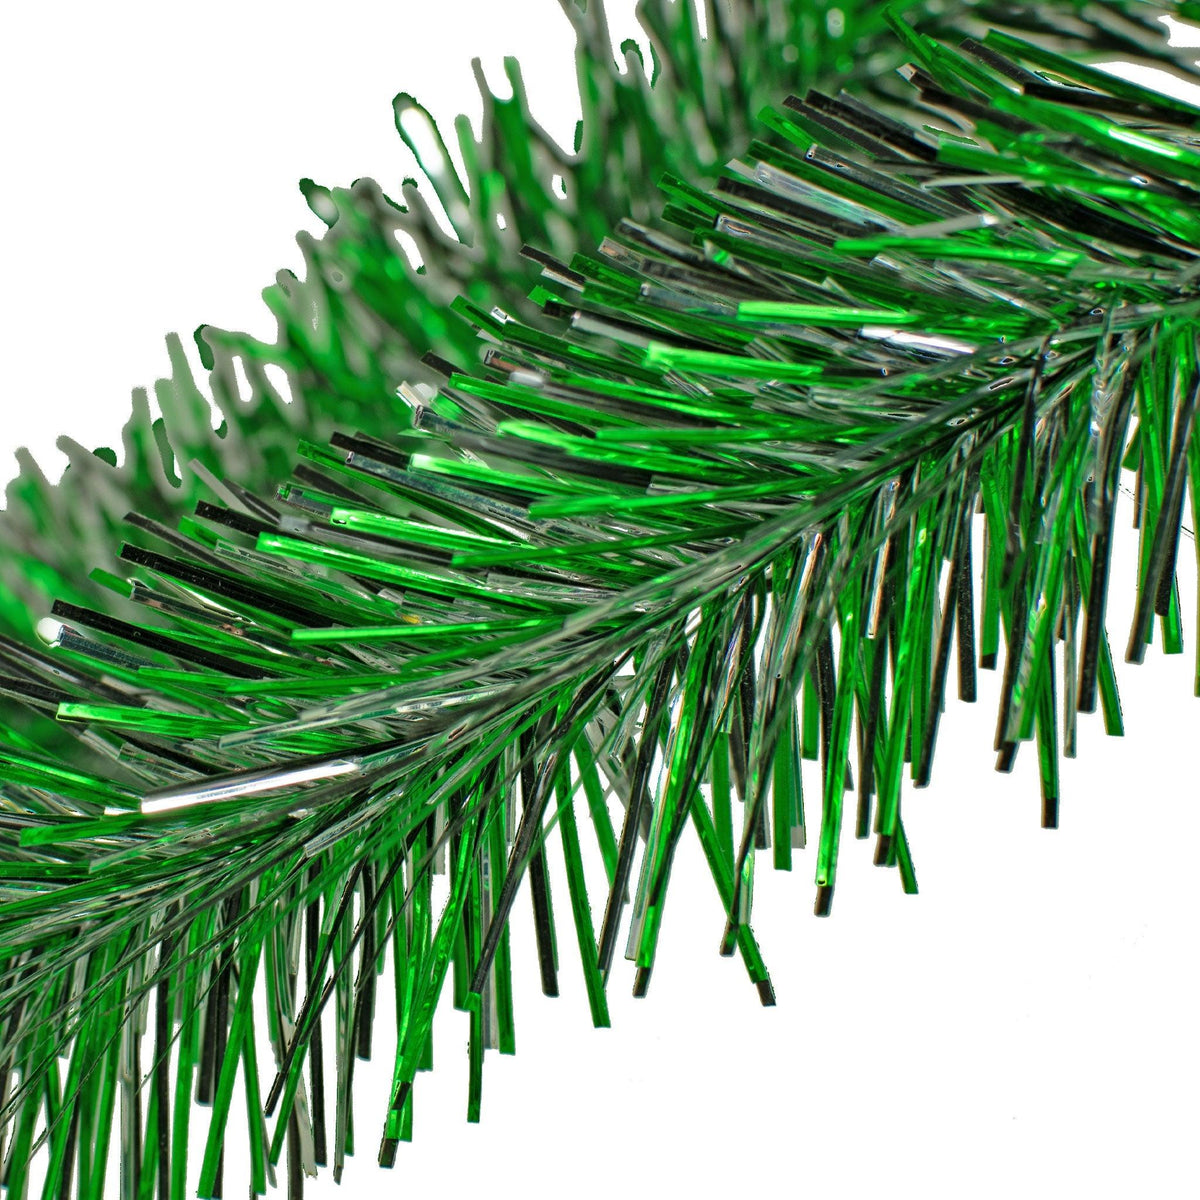 Lee Display's Green Silver and Black Tinsel Garlands sold in 25ft lengths at leedisplay.com